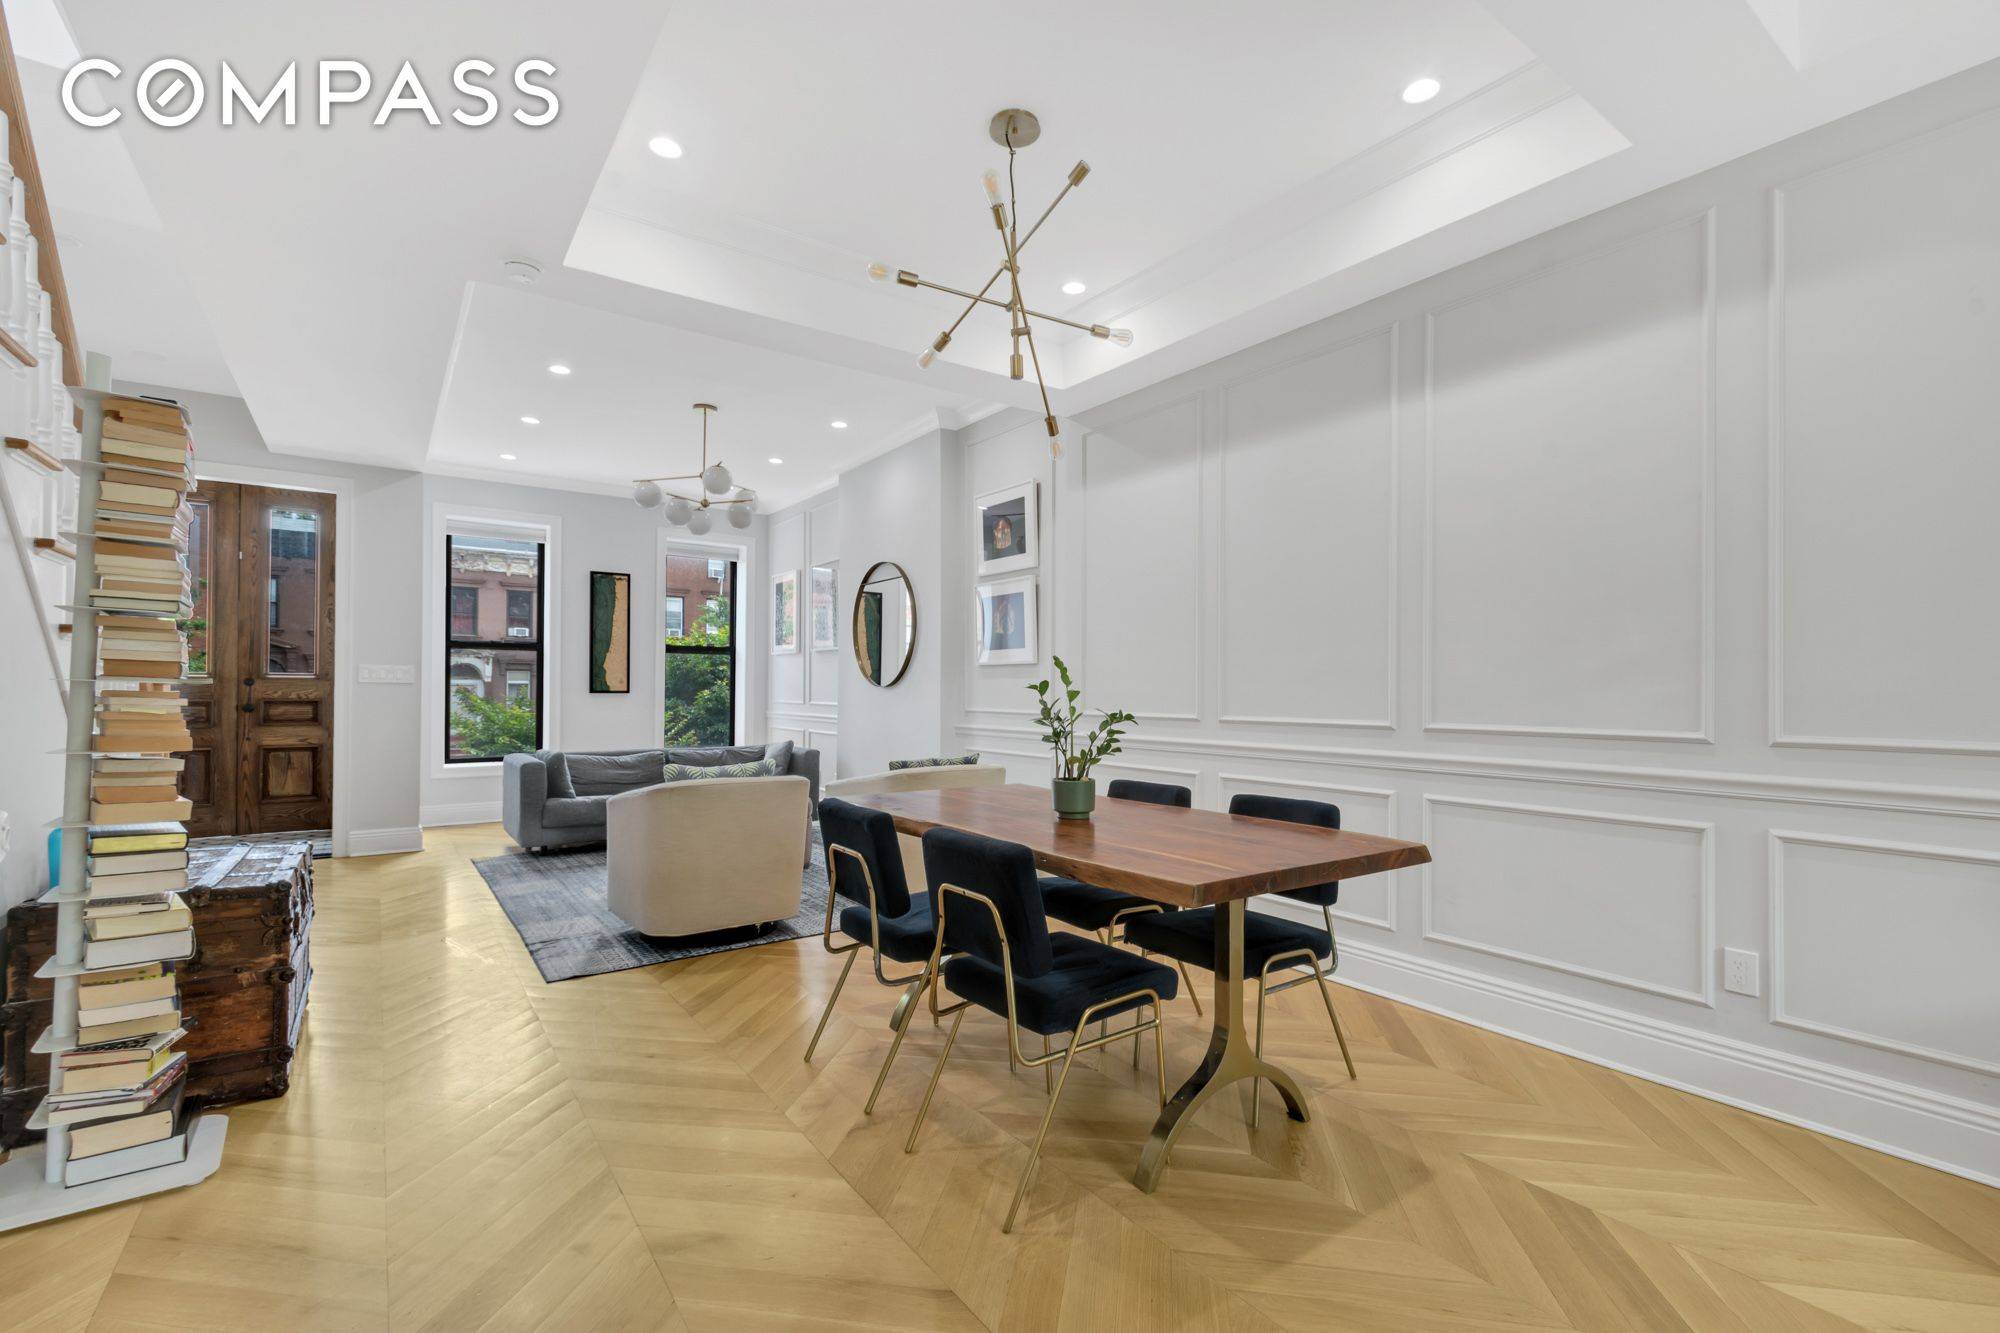 Welcome home to 241 Lexington Avenue, a thoughtfully designed and gut renovated 2 family townhouse with 4 bedrooms, three full baths two half baths and nestled on a charming, tree ...